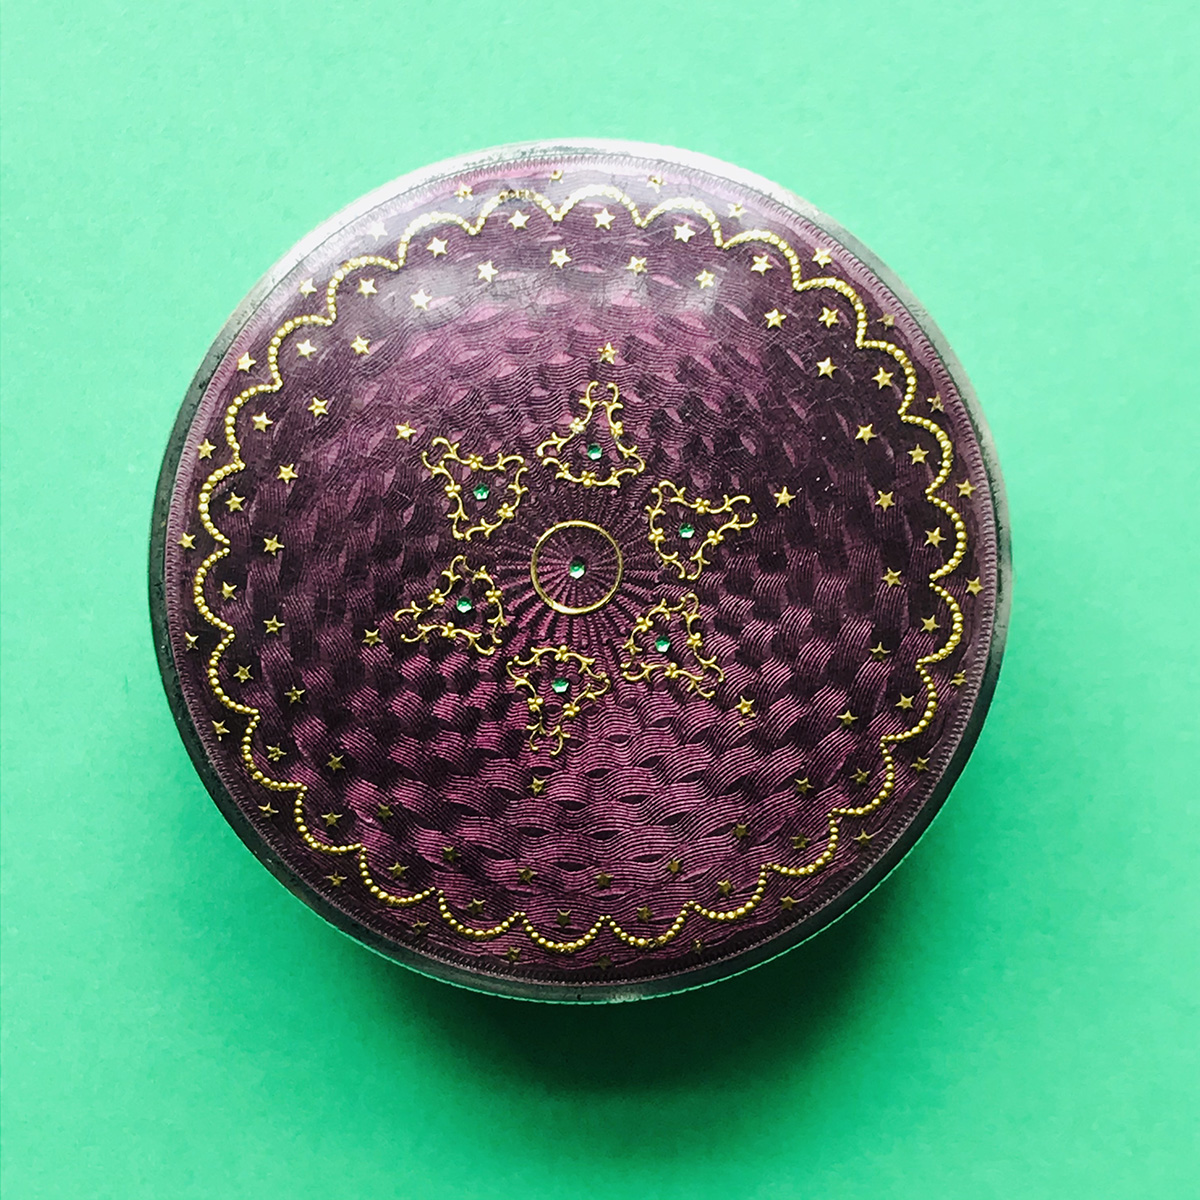 Inlaid Silver Mini Compact with Guilloche Enamel Lid